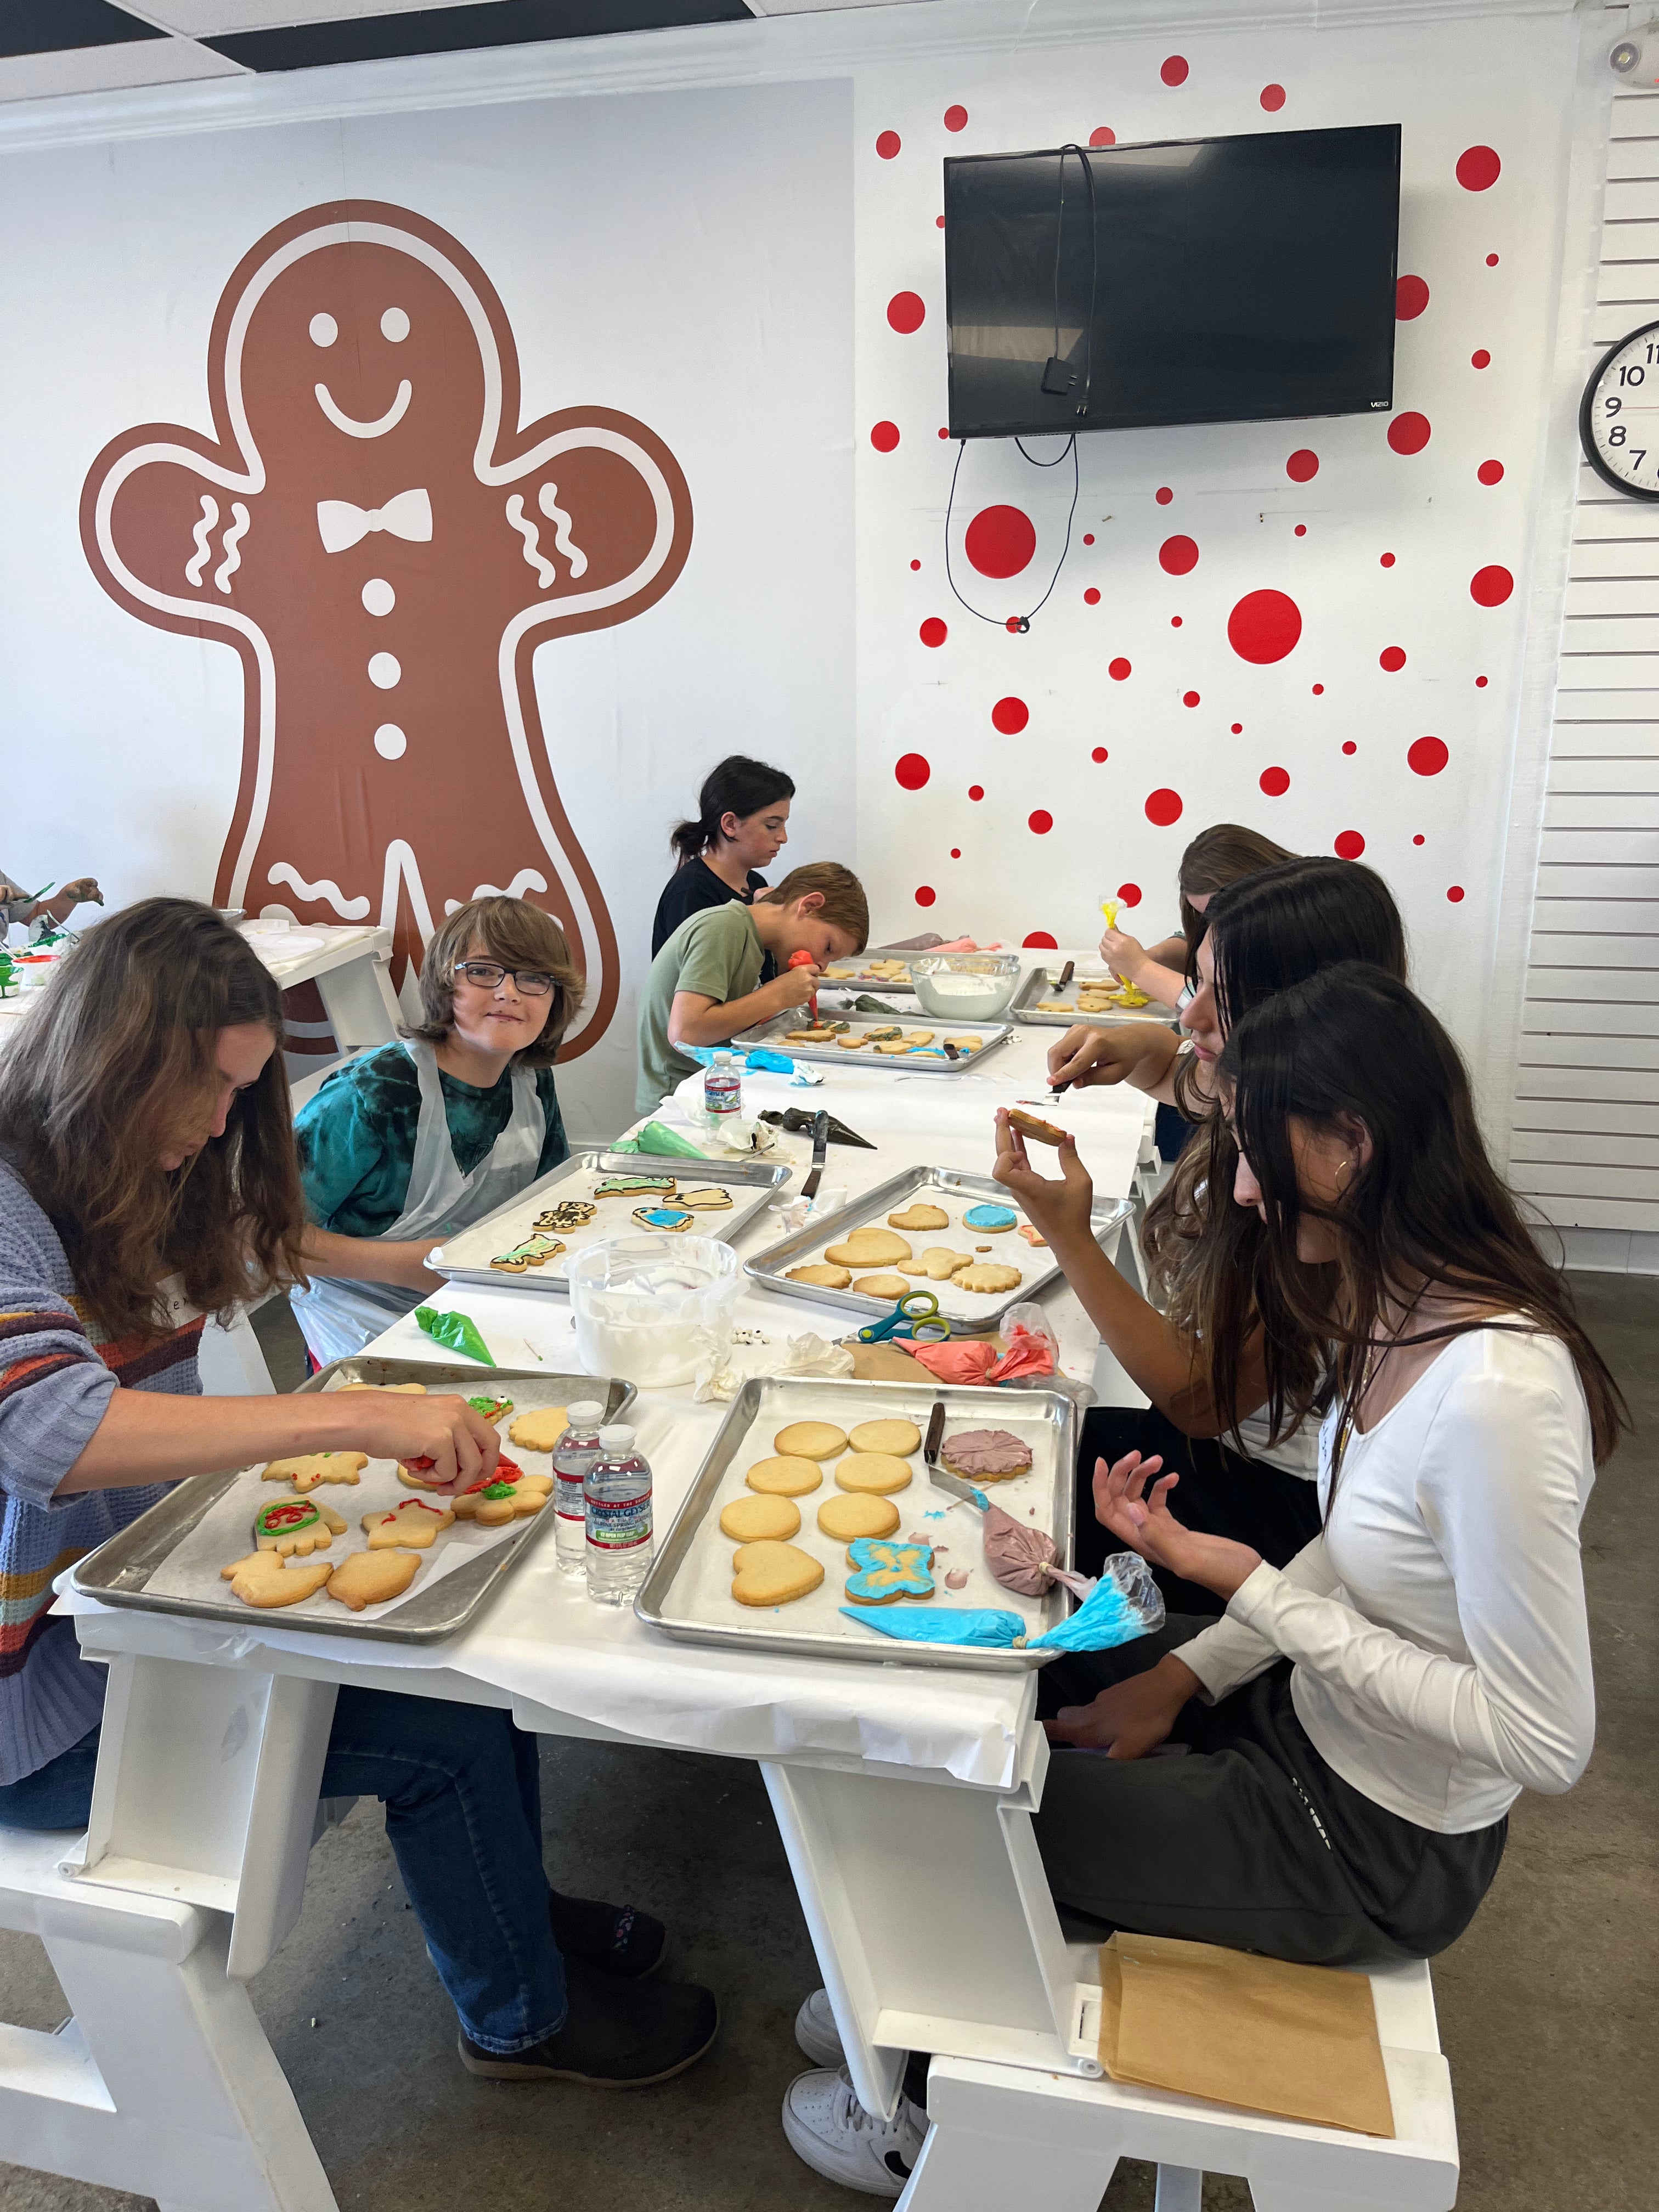 COOKIE CAMP SESSIONS!